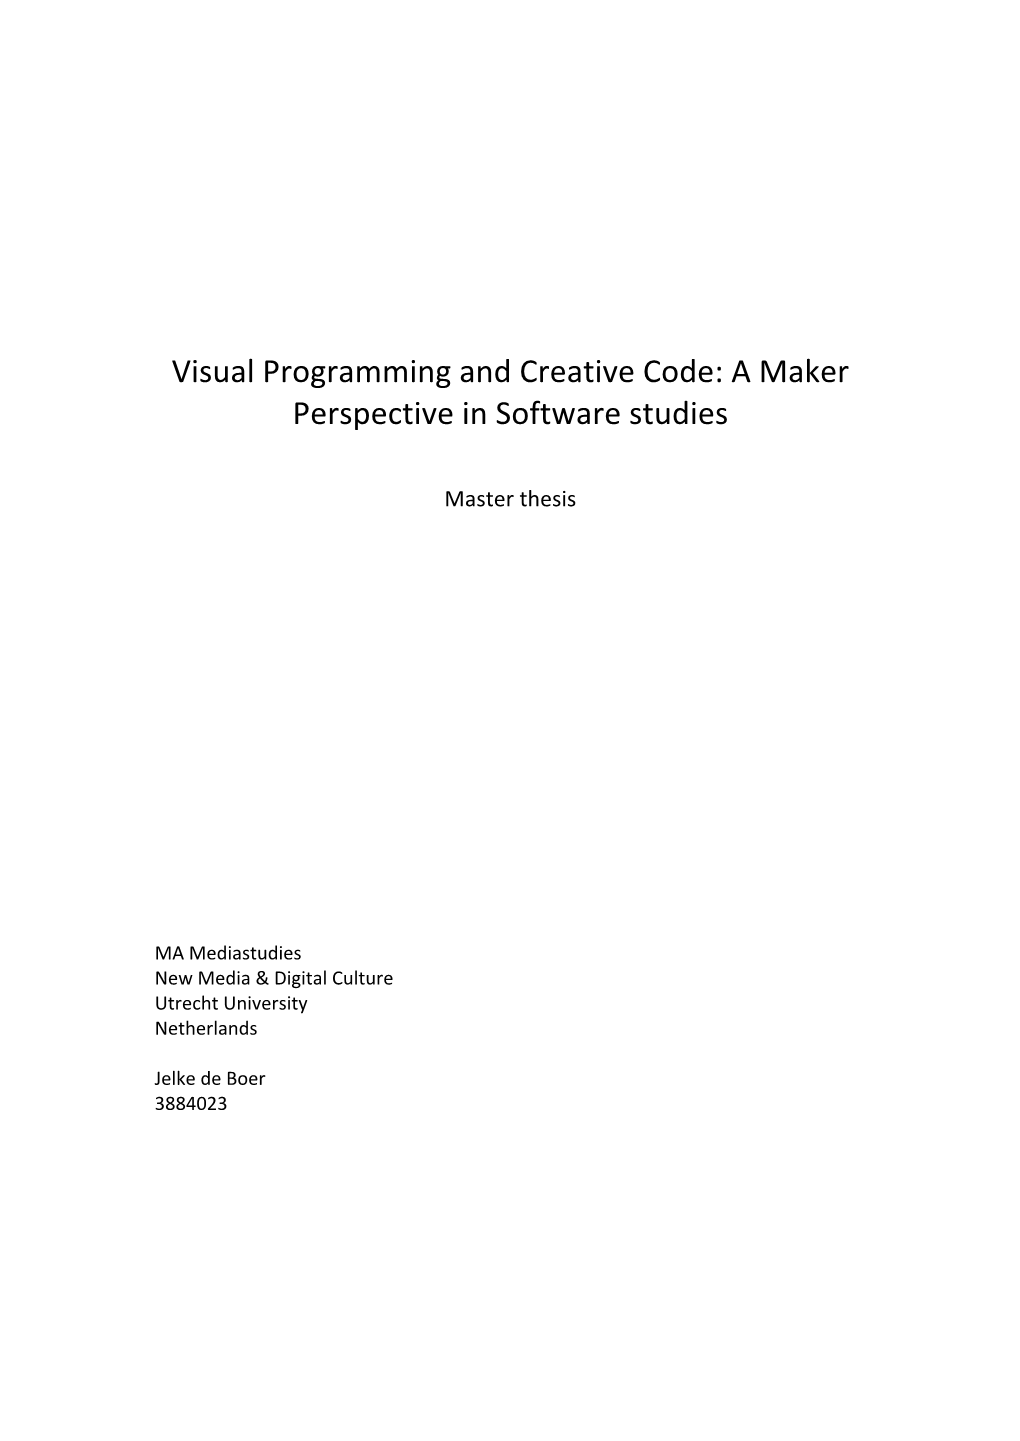 Visual Programming and Creative Code: a Maker Perspective in Software Studies